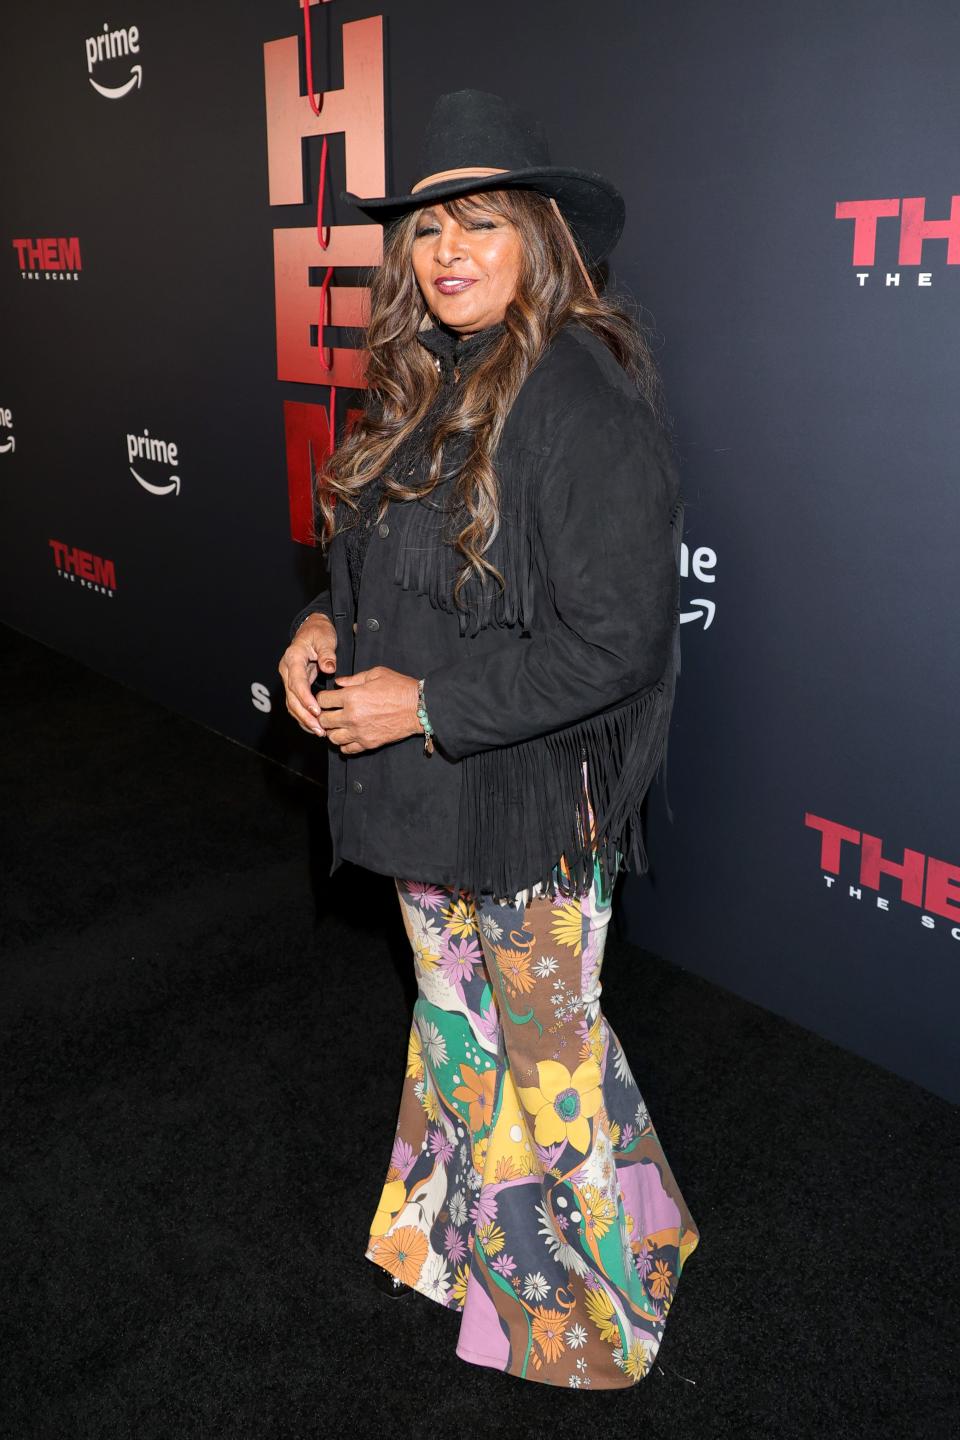 Pam Grier attends a special screening for "Them: The Scare" in Culver City, California. (Photo by Arnold Turner/Getty Images for Prime Video)